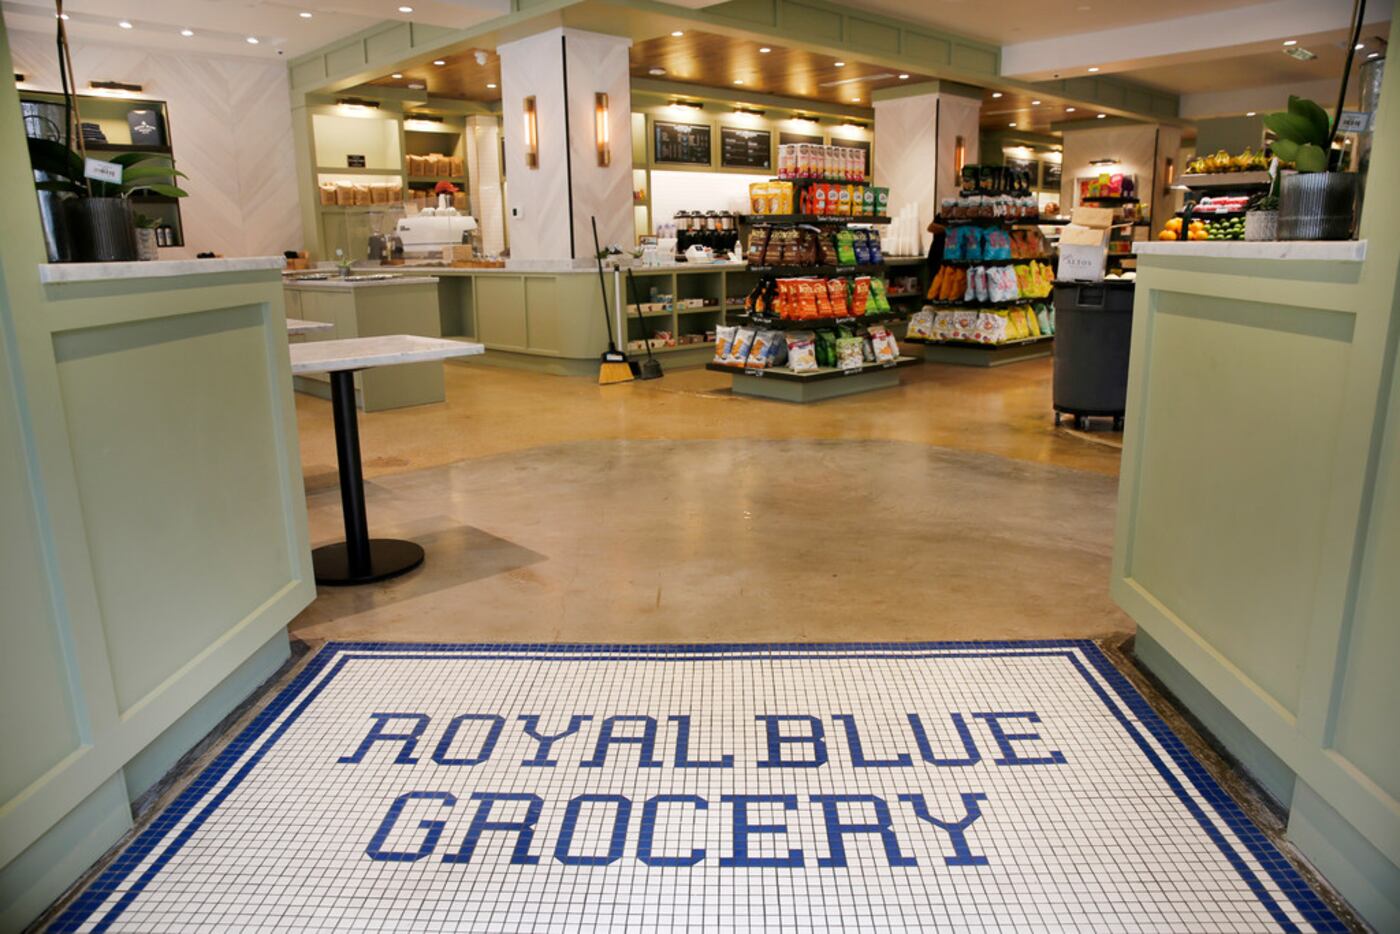 The Royal Blue Grocery tile entryway welcomes shoppers and diners to it's new store at Main...